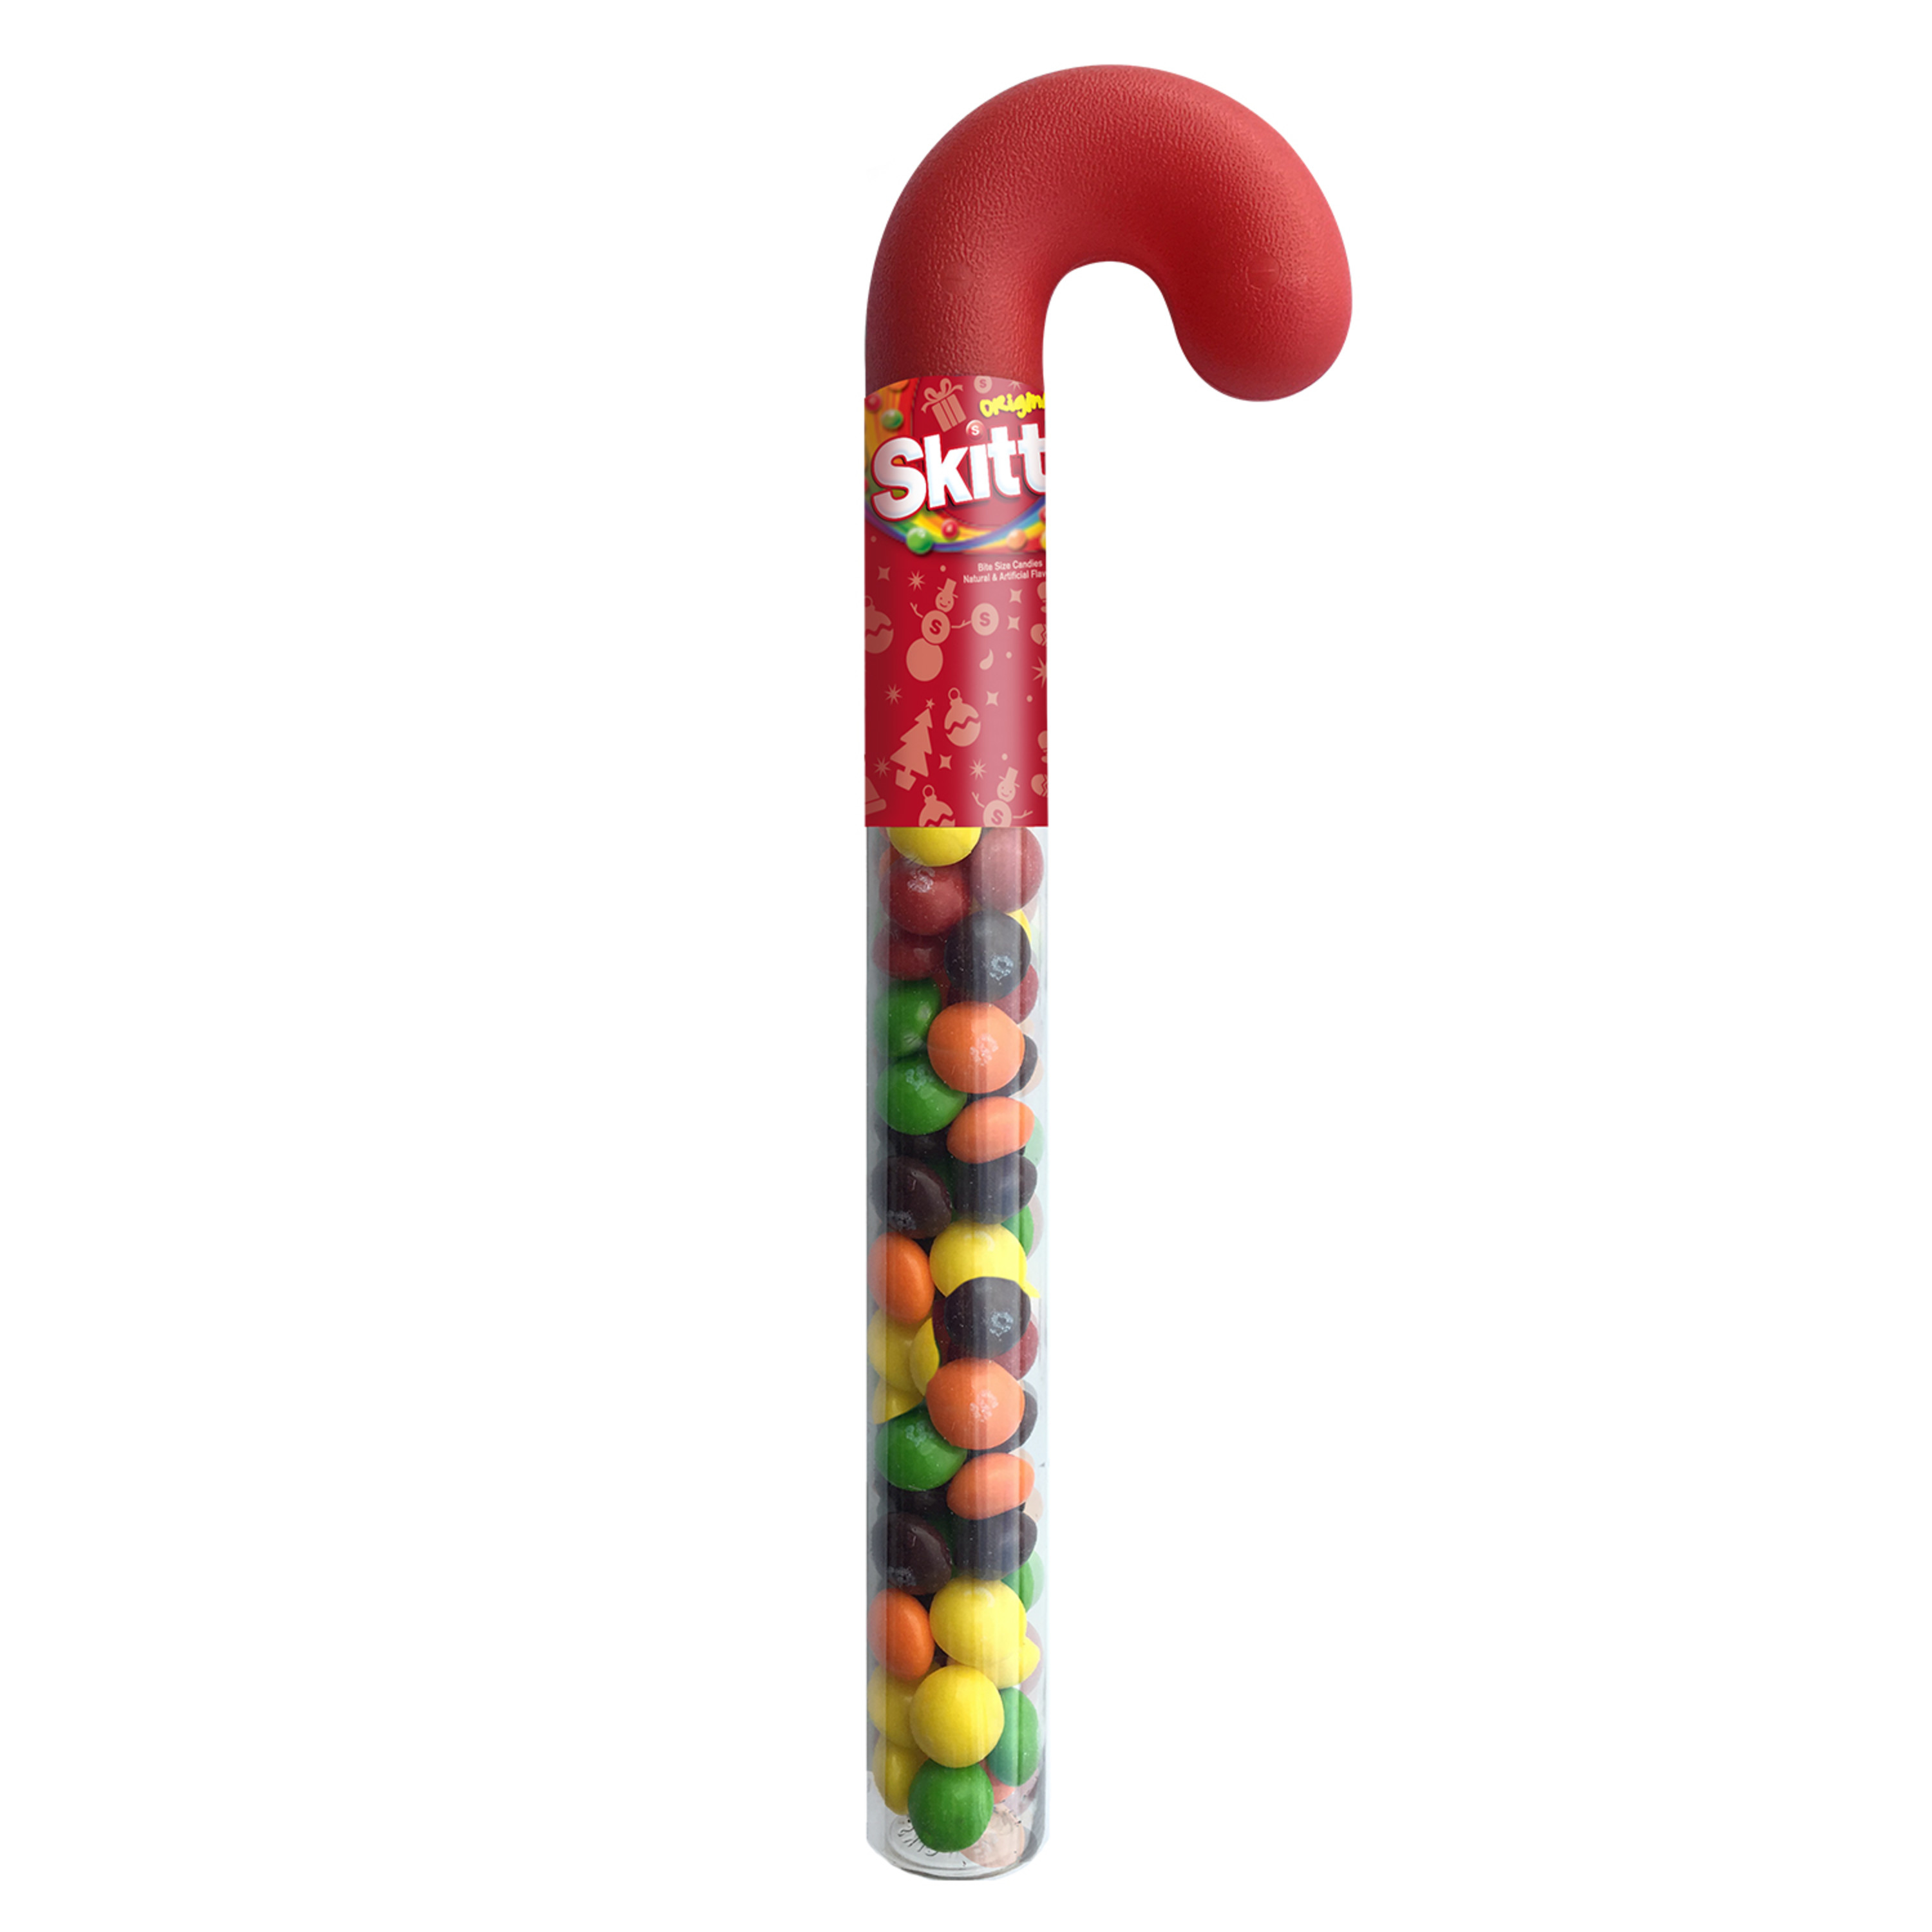 Skittles Original Filled Christmas Candy Cane Tube, 1.7 ounce - image 1 of 8